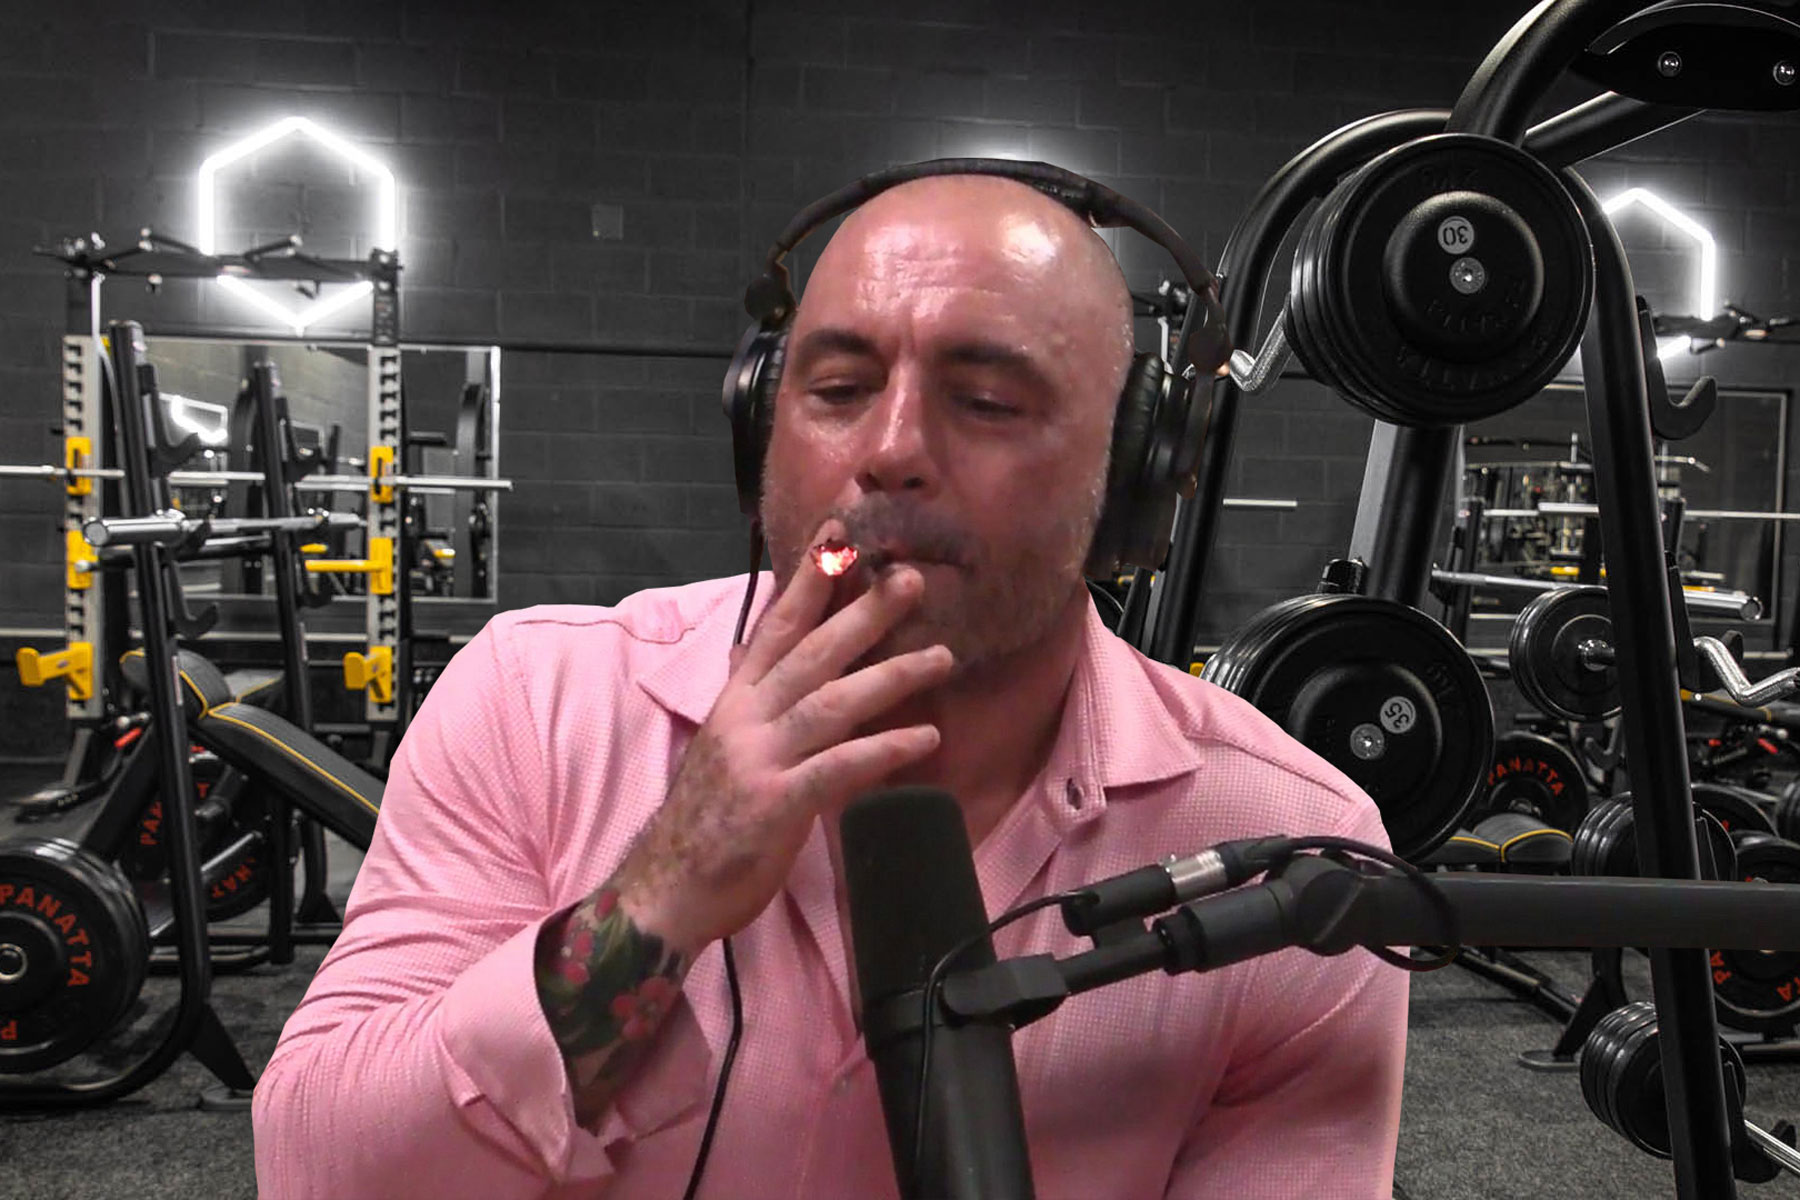 Weed Workout May Be Joe Rogan’s Most Controversial